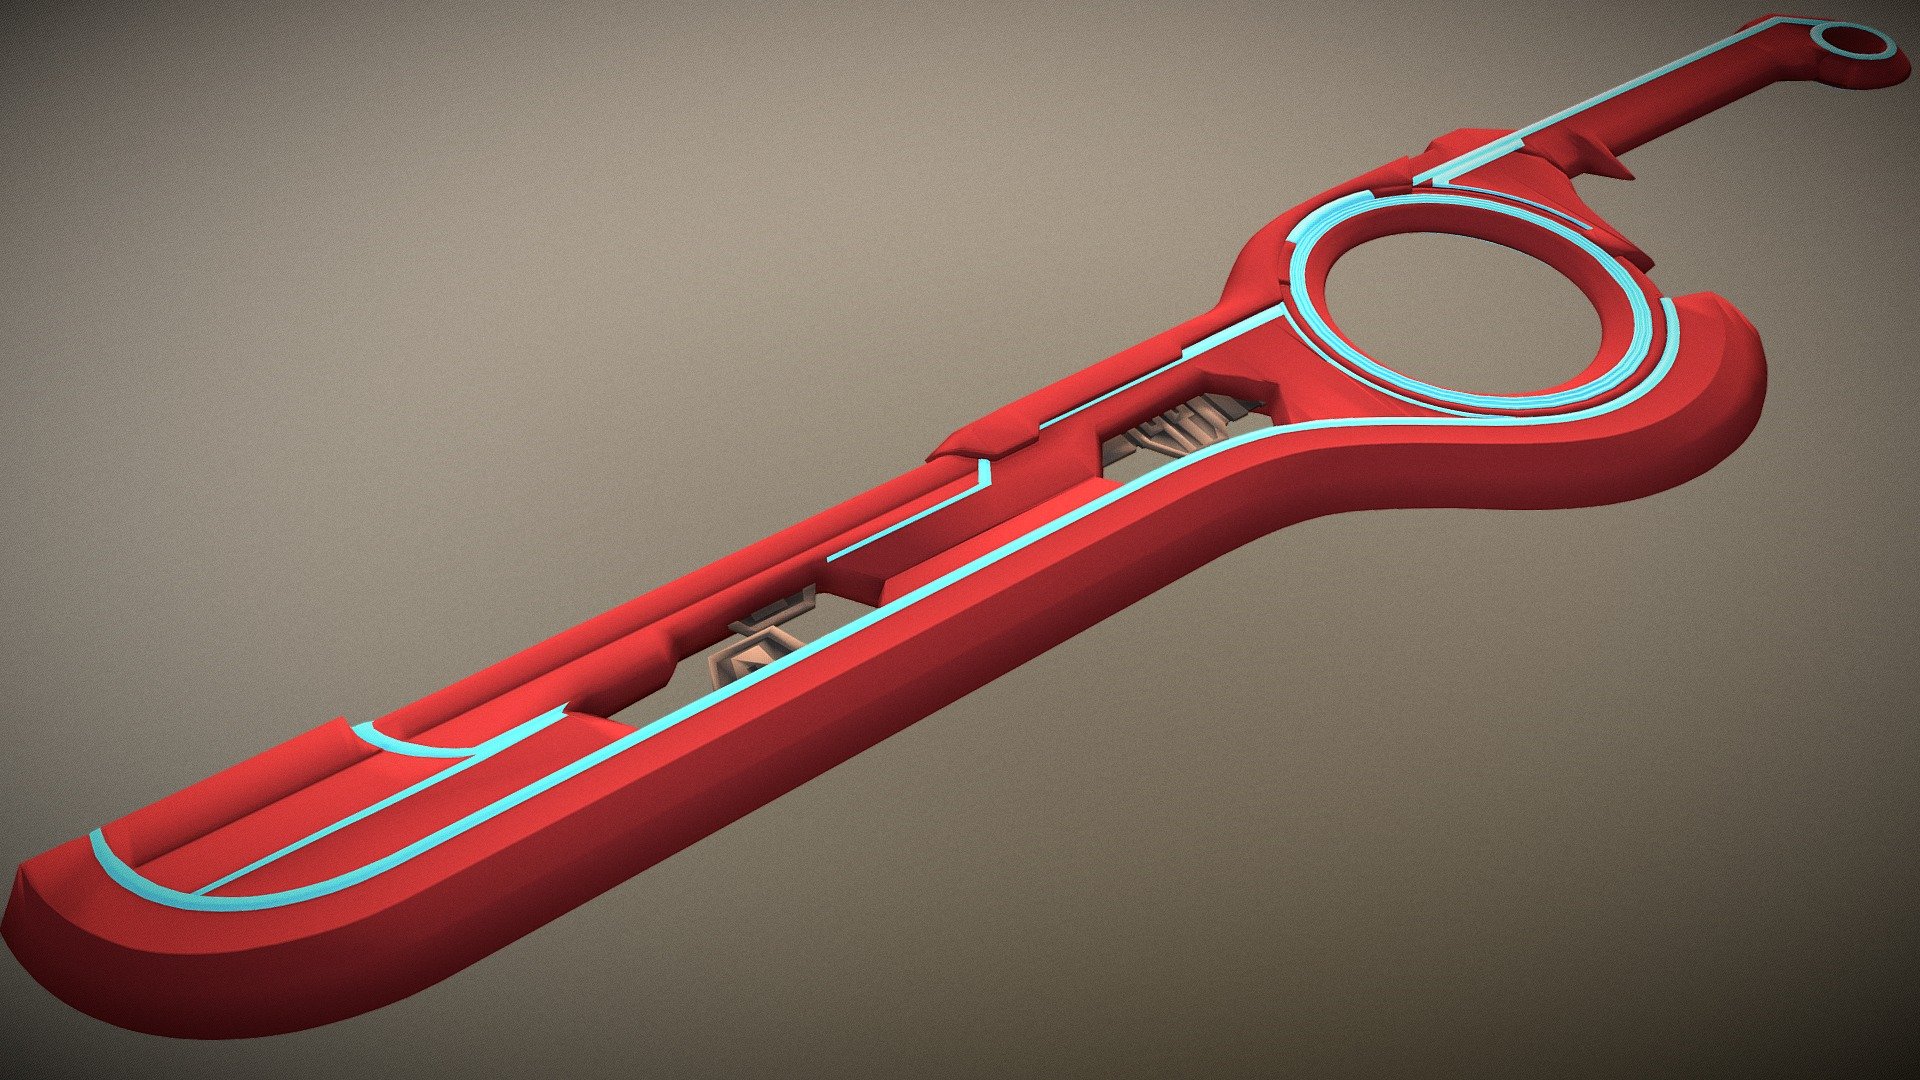 With the knowledge I've gained from the previous sword I made, I created the Monado, a sword that Shulk wields in Xenoblade Chronicles, one of my most favorite games of all time. Can be used as a game asset 3d model